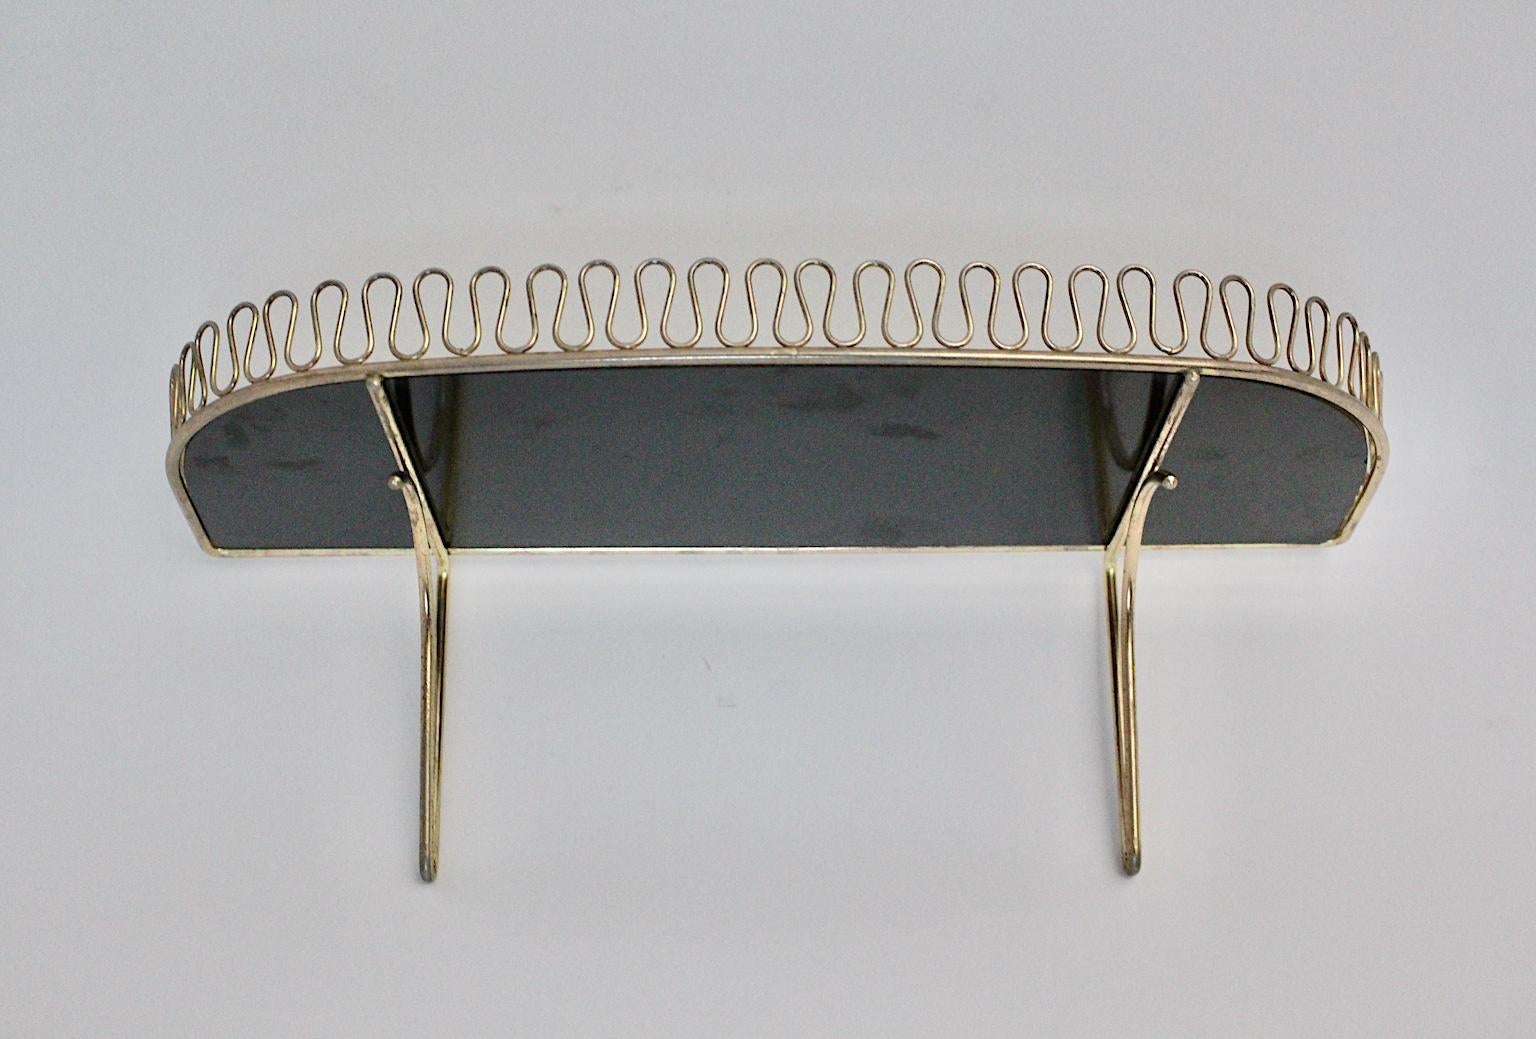 Mid-Century Modern vintage brass wall shelf, which was designed by Josef Frank for Svenskt Tenn, 1950s, Sweden.
Small metal loops decorates the delicate wall shelf. Furthermore it has a tray, which was made out of black and white Formica.
Great, so